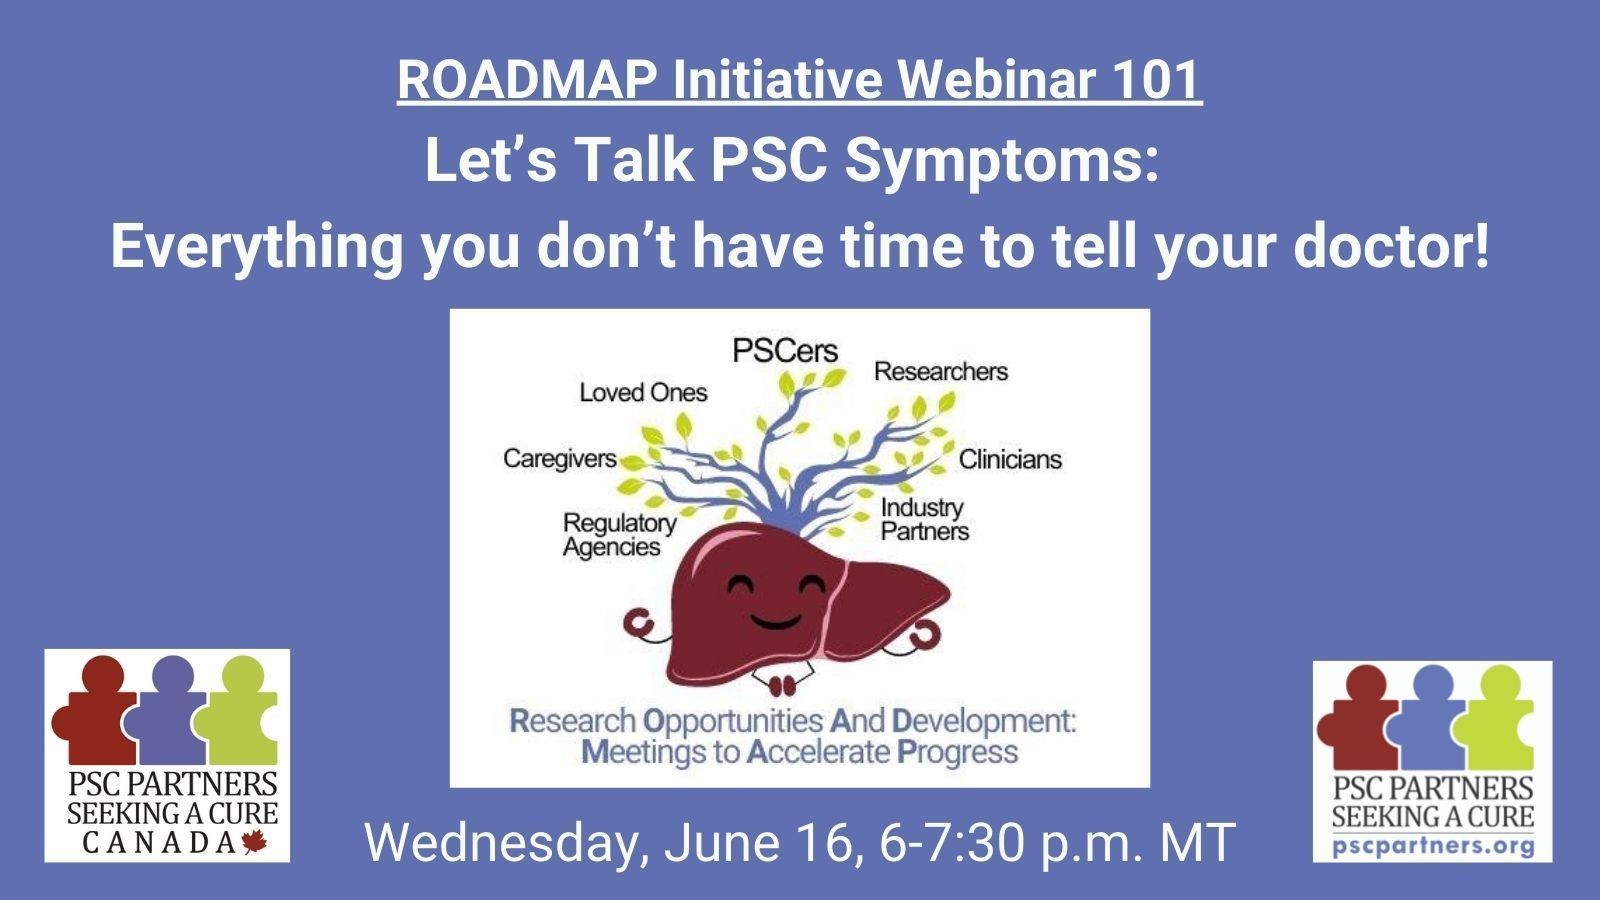 ROADMAP Initiative 101 - Let's Talk PSC Symptoms: Everything you don't have time to tell your doctor!